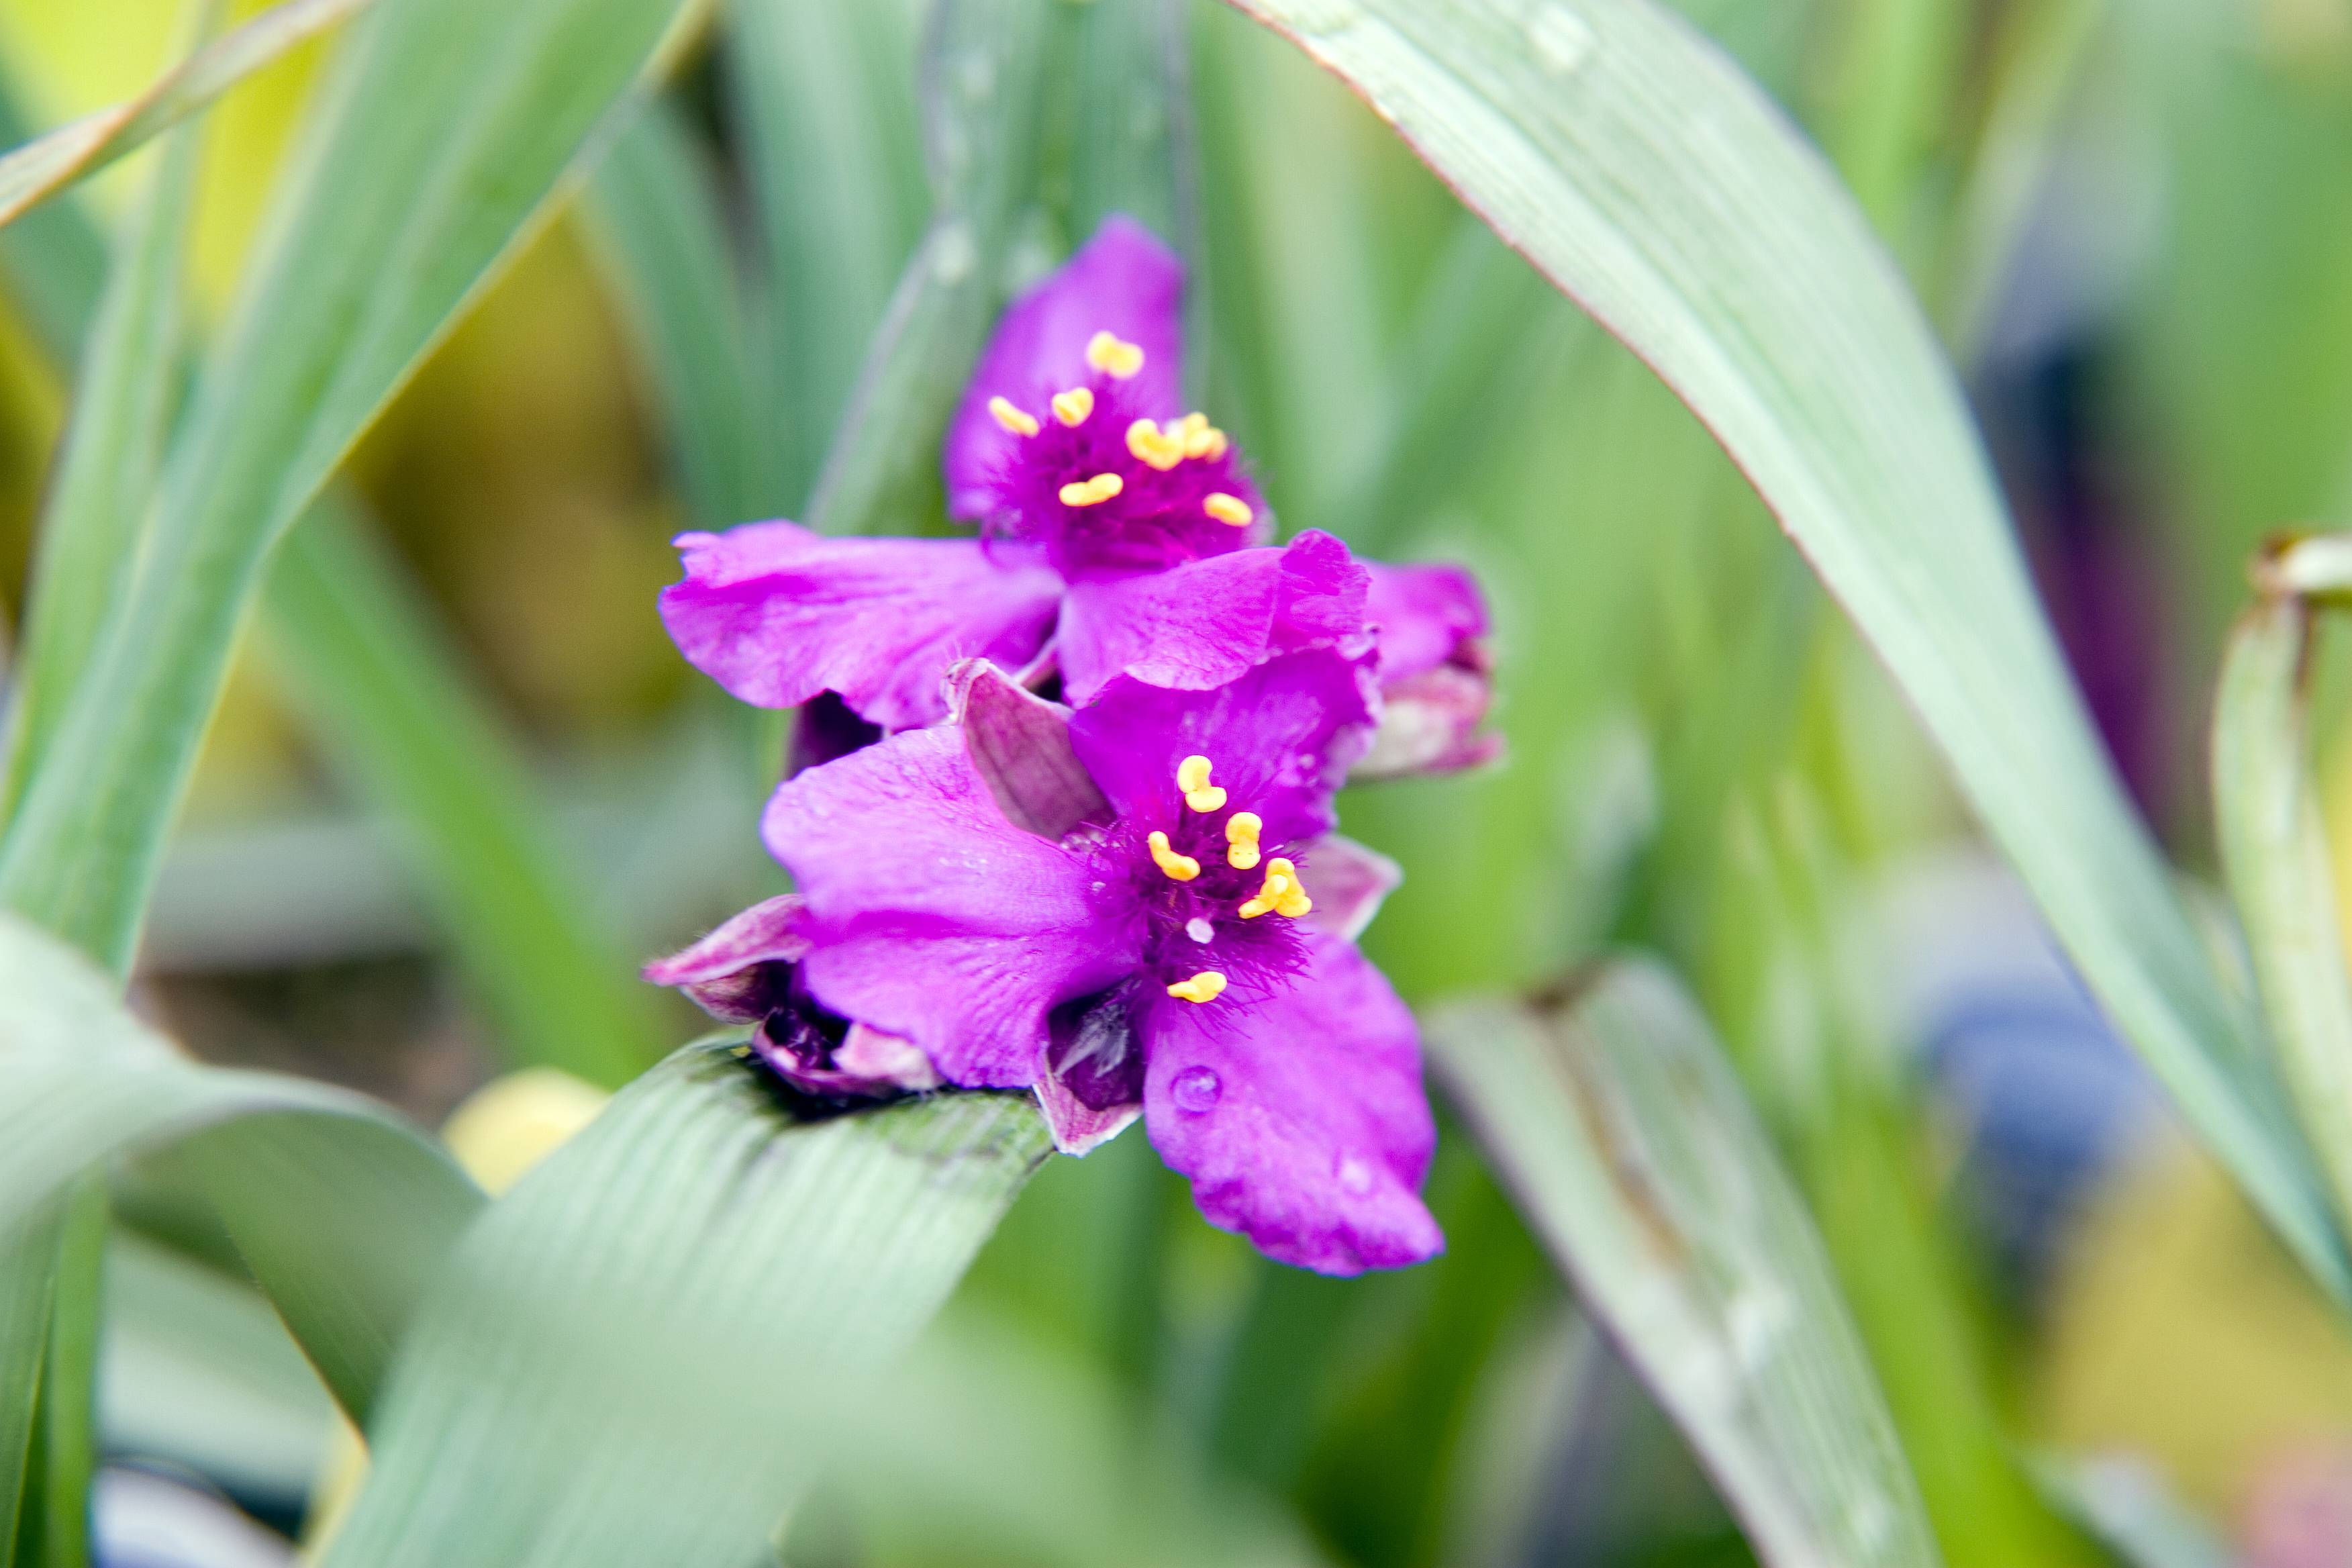 purple flowers with purple filaments, yellow anthers and green leaves